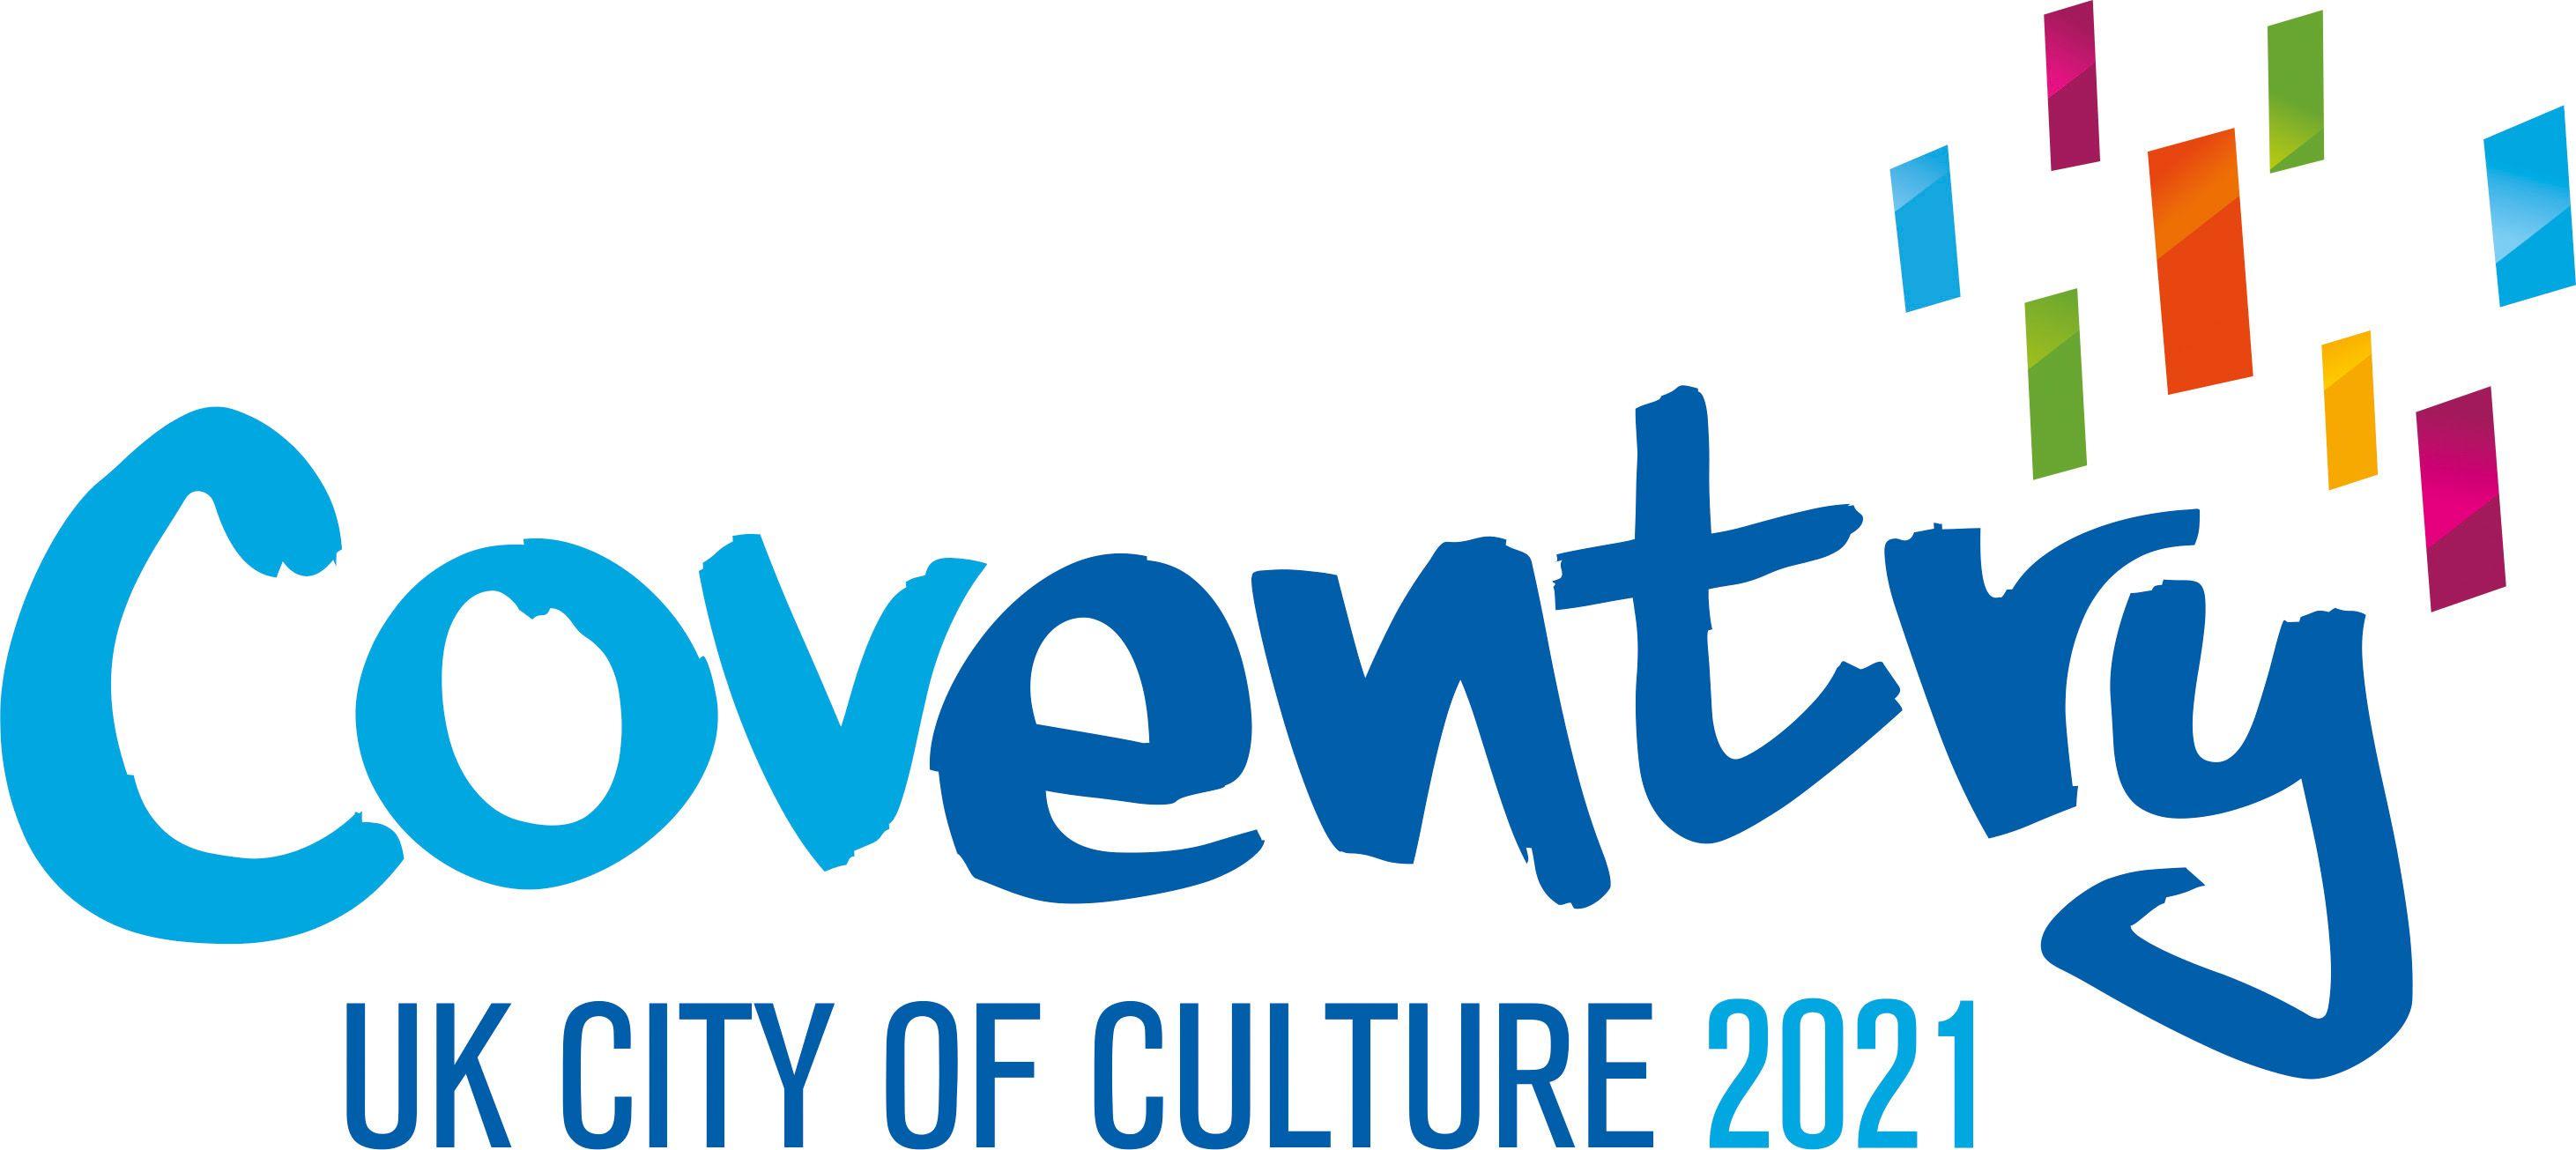 2021 Logo - UK City of Culture 2021, Coventry